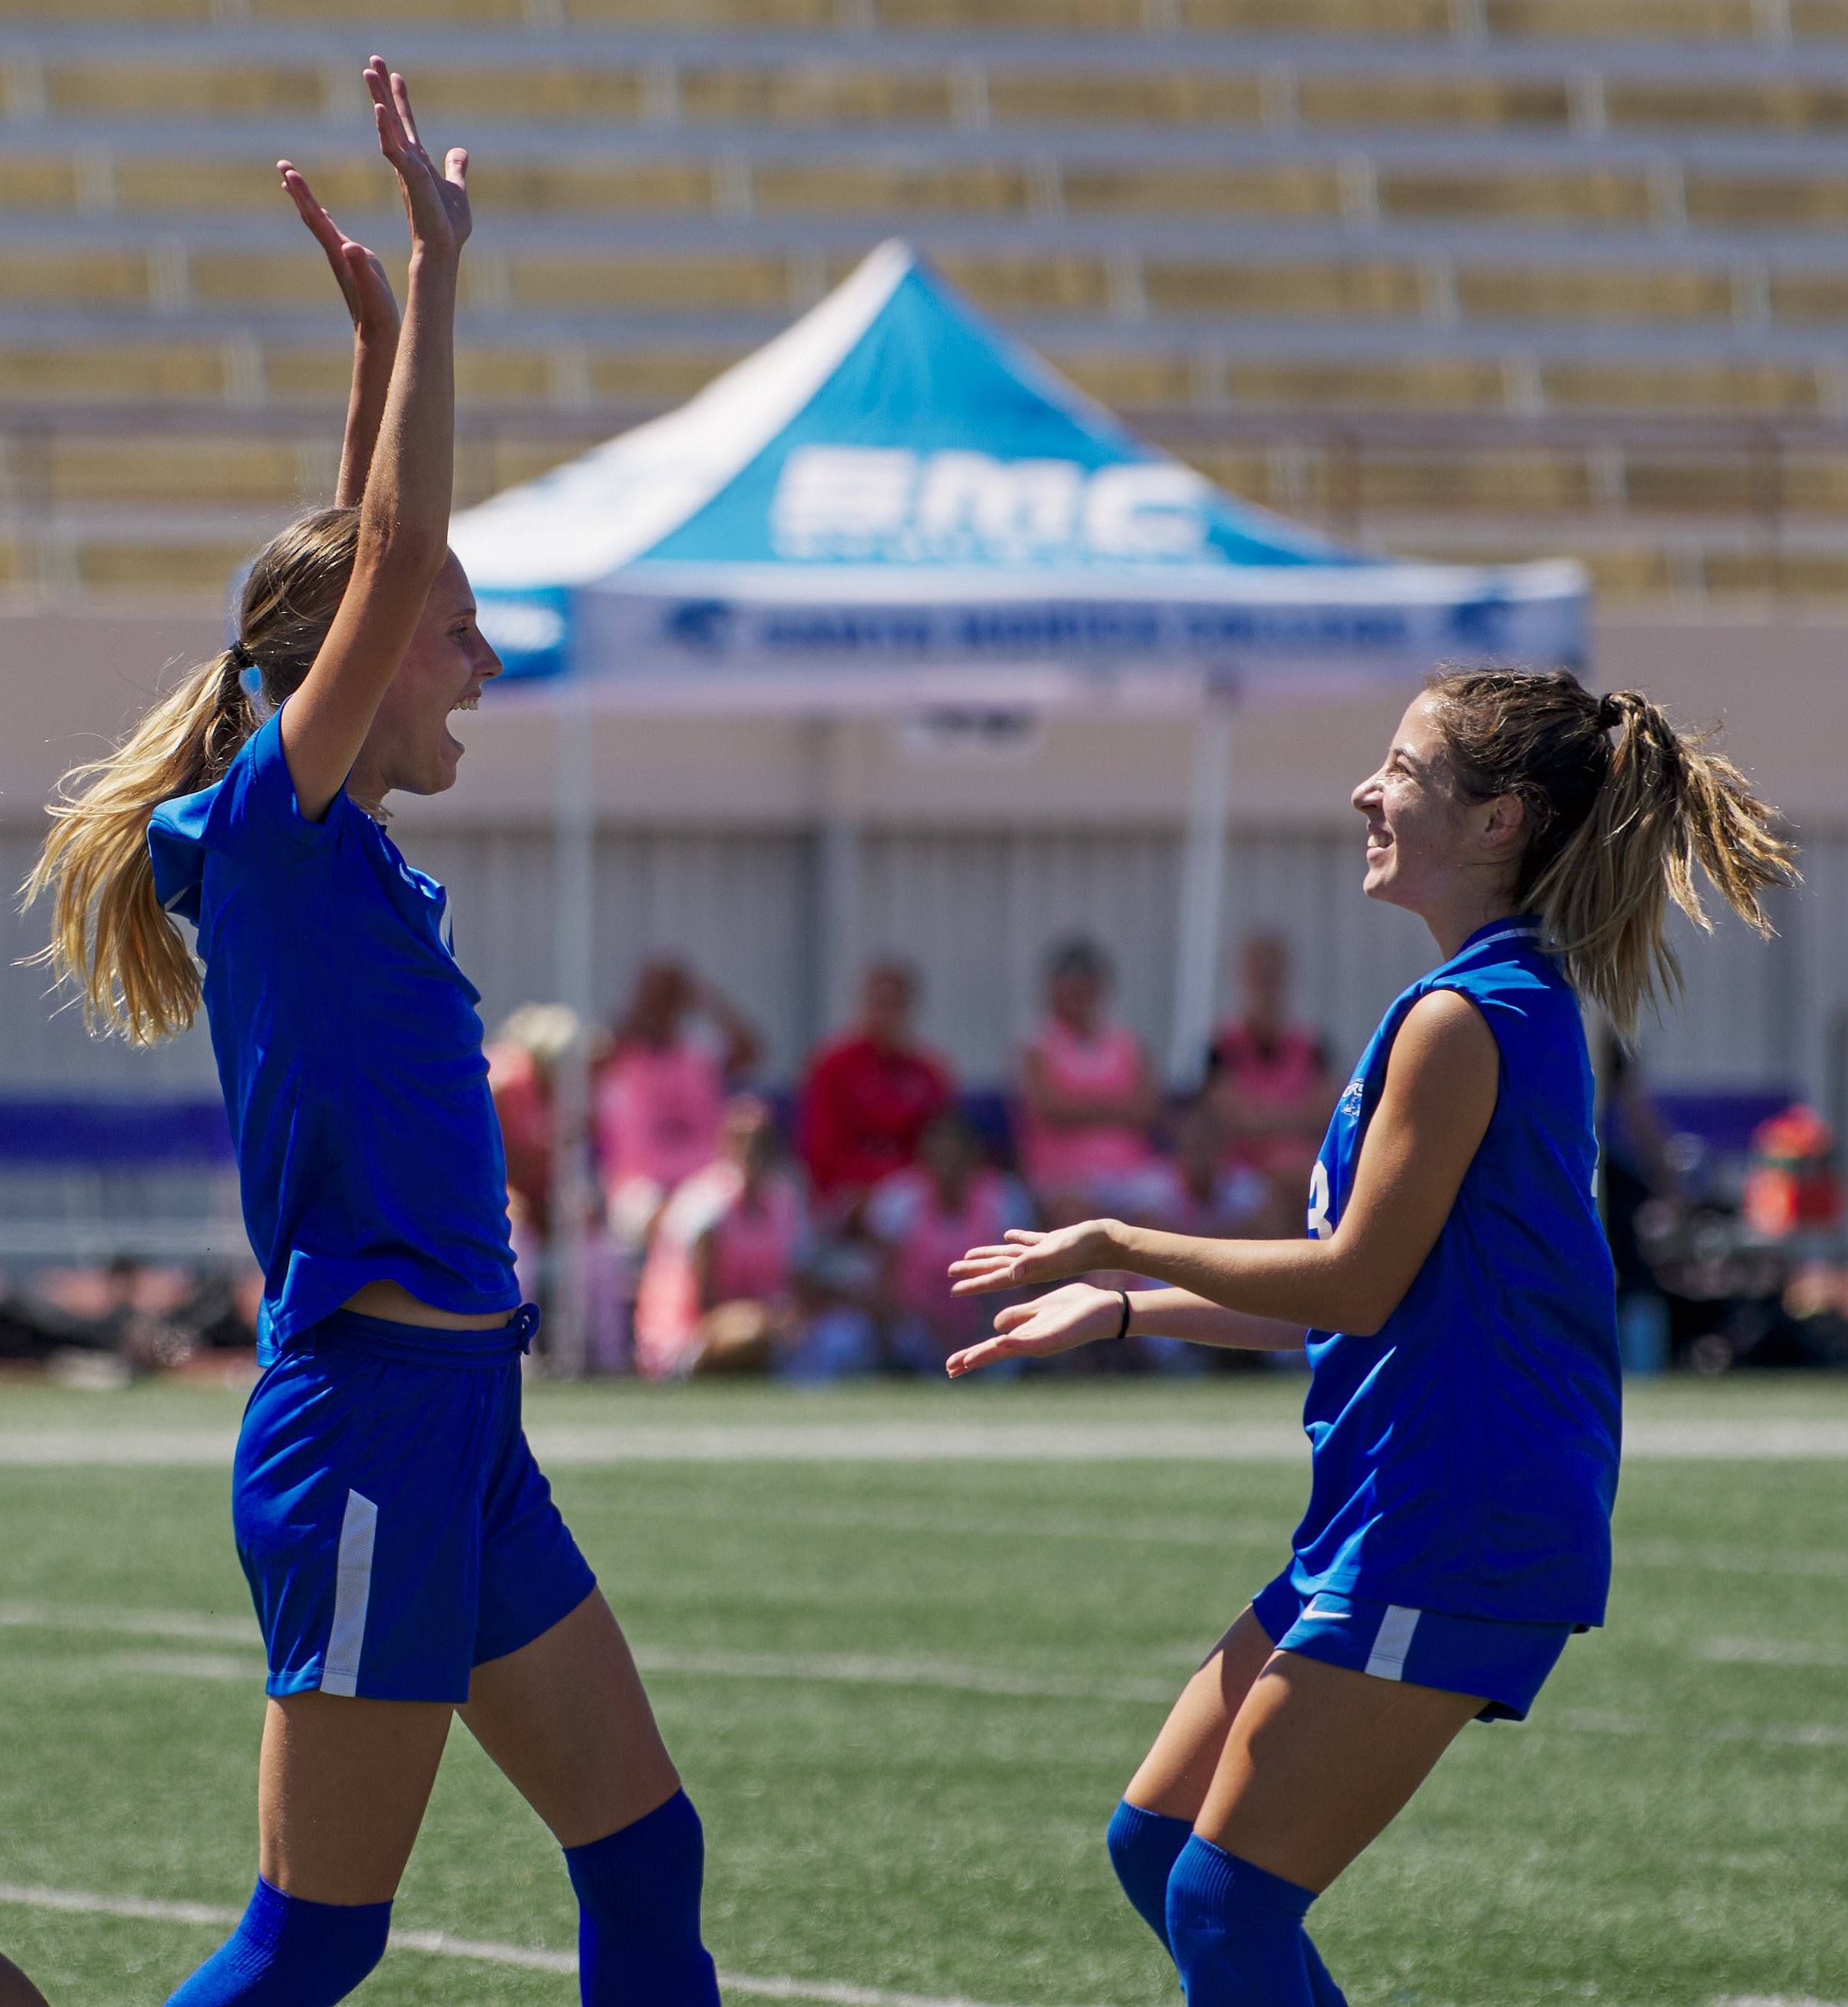  Emma Rierstam and Sophie Doumitt, of the Santa Monica College Corsairs Women's Soccer team, celebrate after Rierstam scored the Corsair's sole goal against the Santa Barbara City College Vaqueros on Tuesday, Sept. 20, 2022, at Corsair Field in Santa